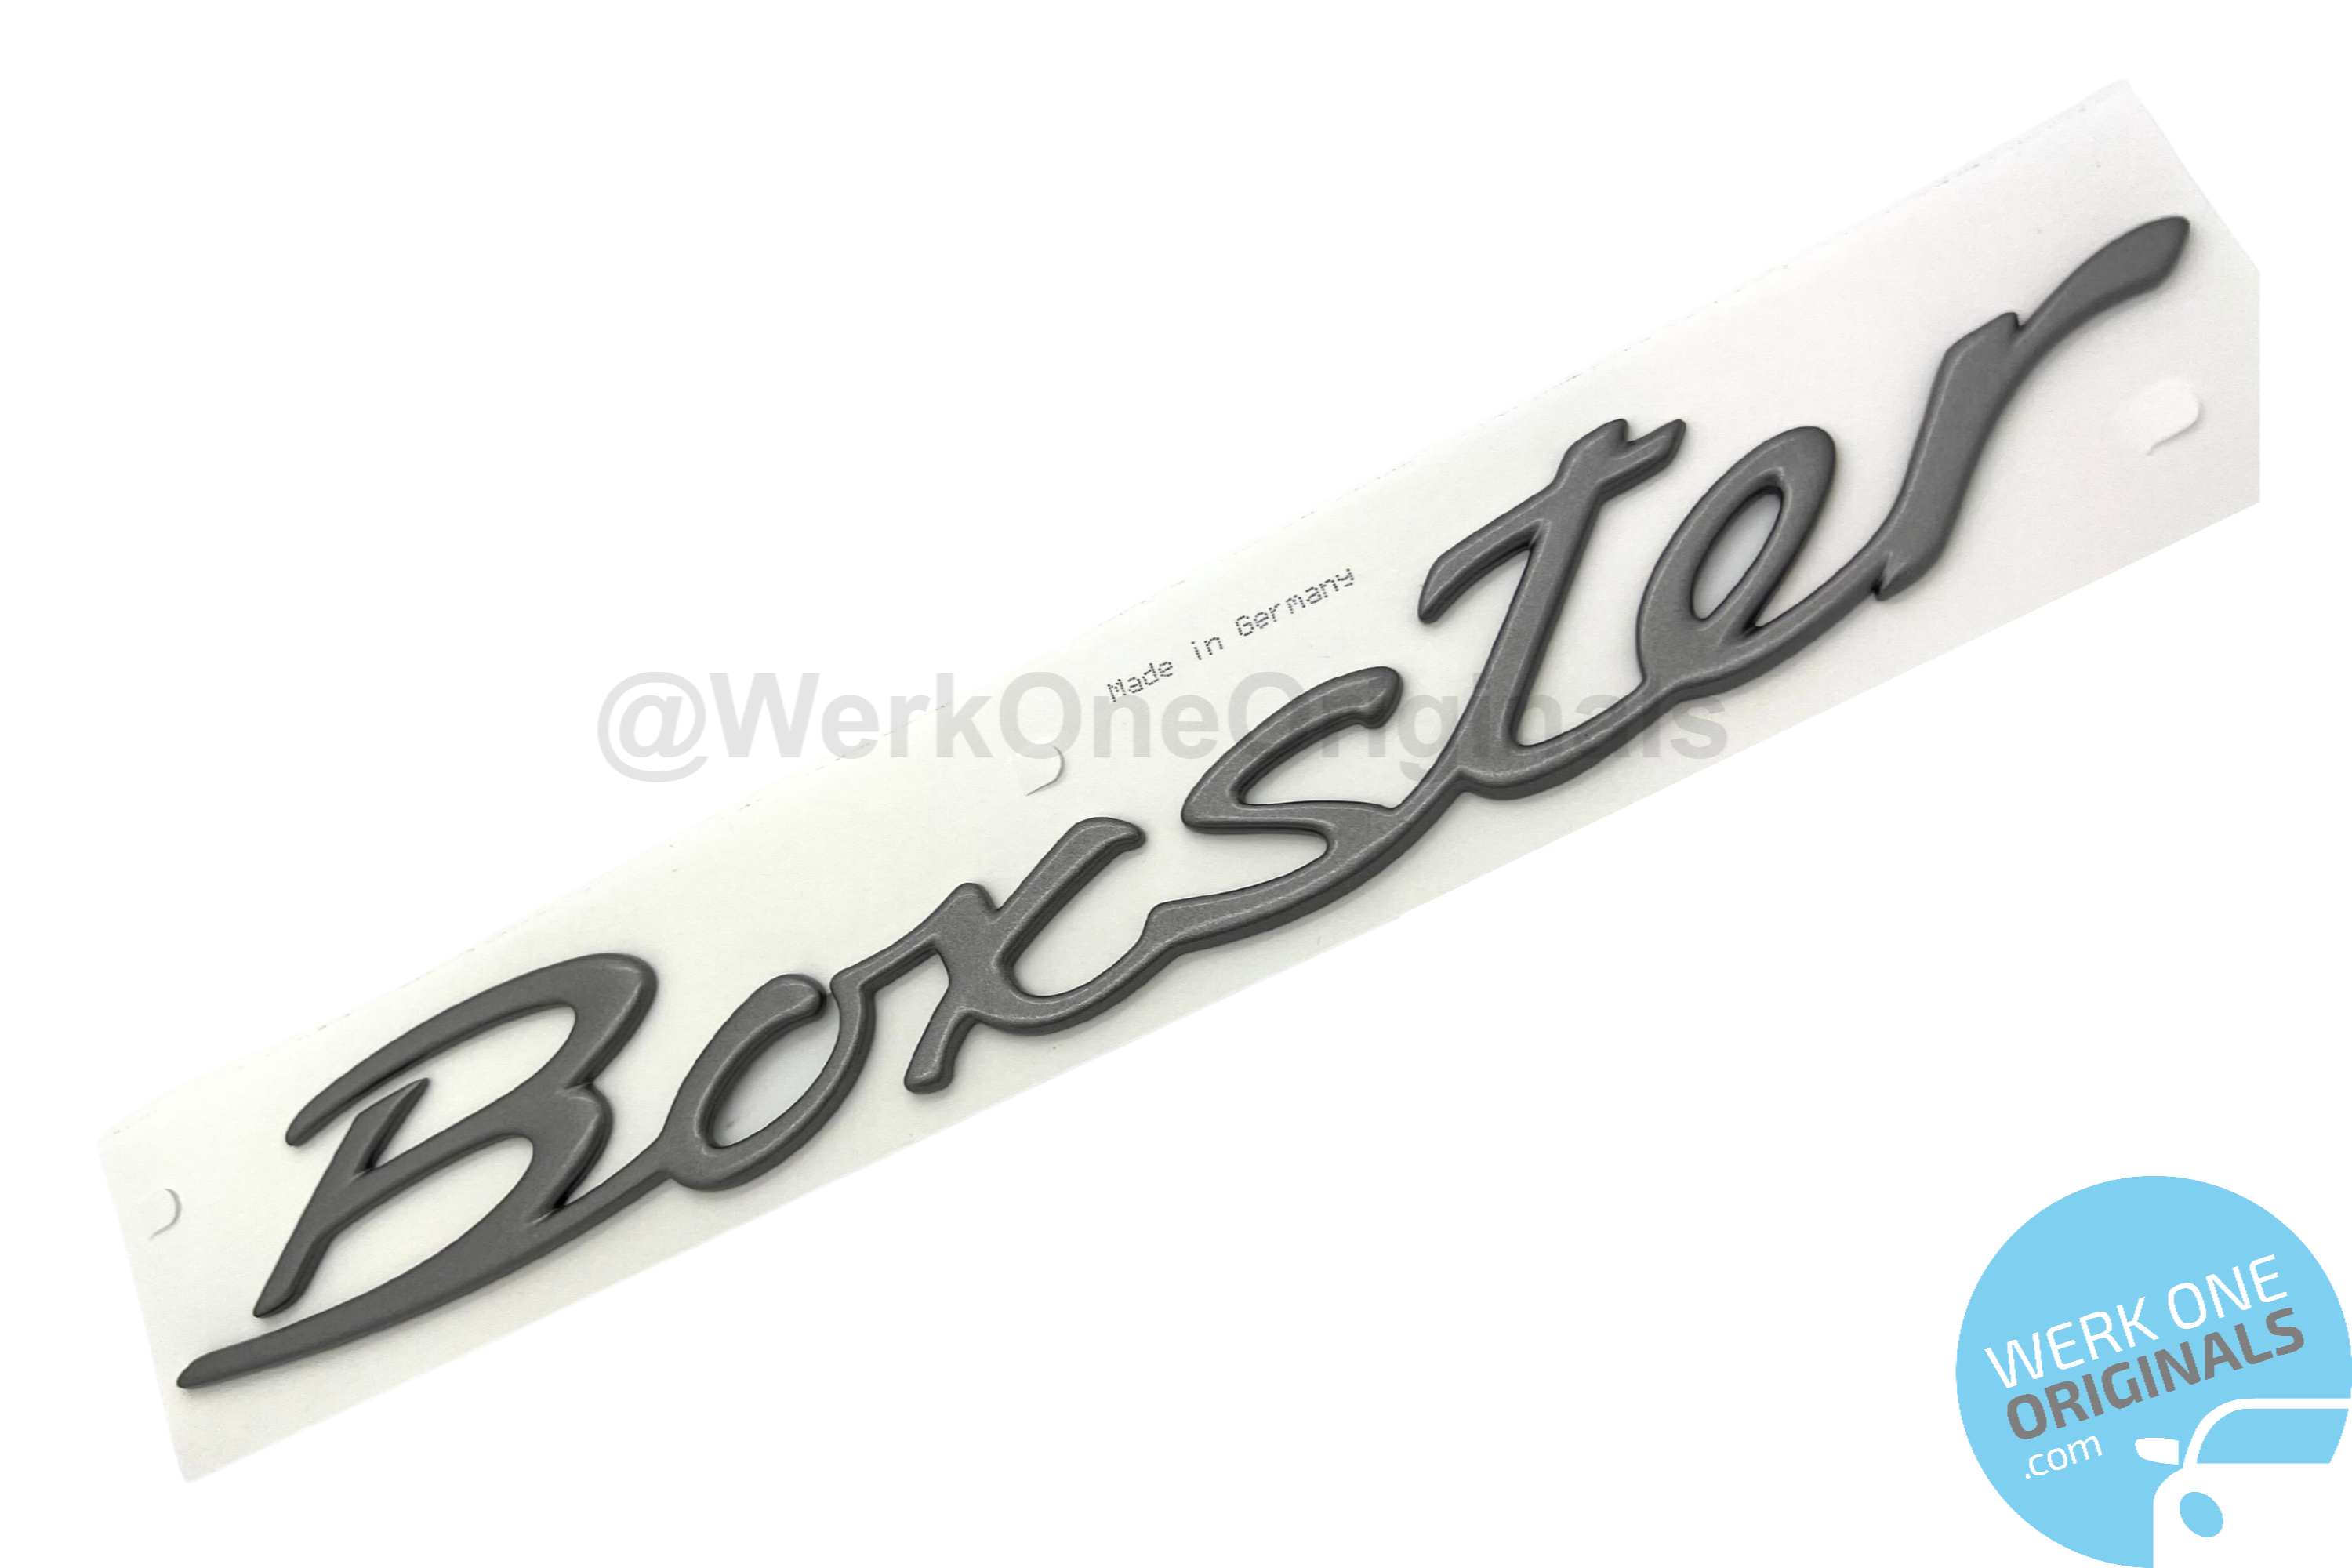 Porsche 'Boxster' Rear Badge in Titanium Grey for Boxster Type 987 Models